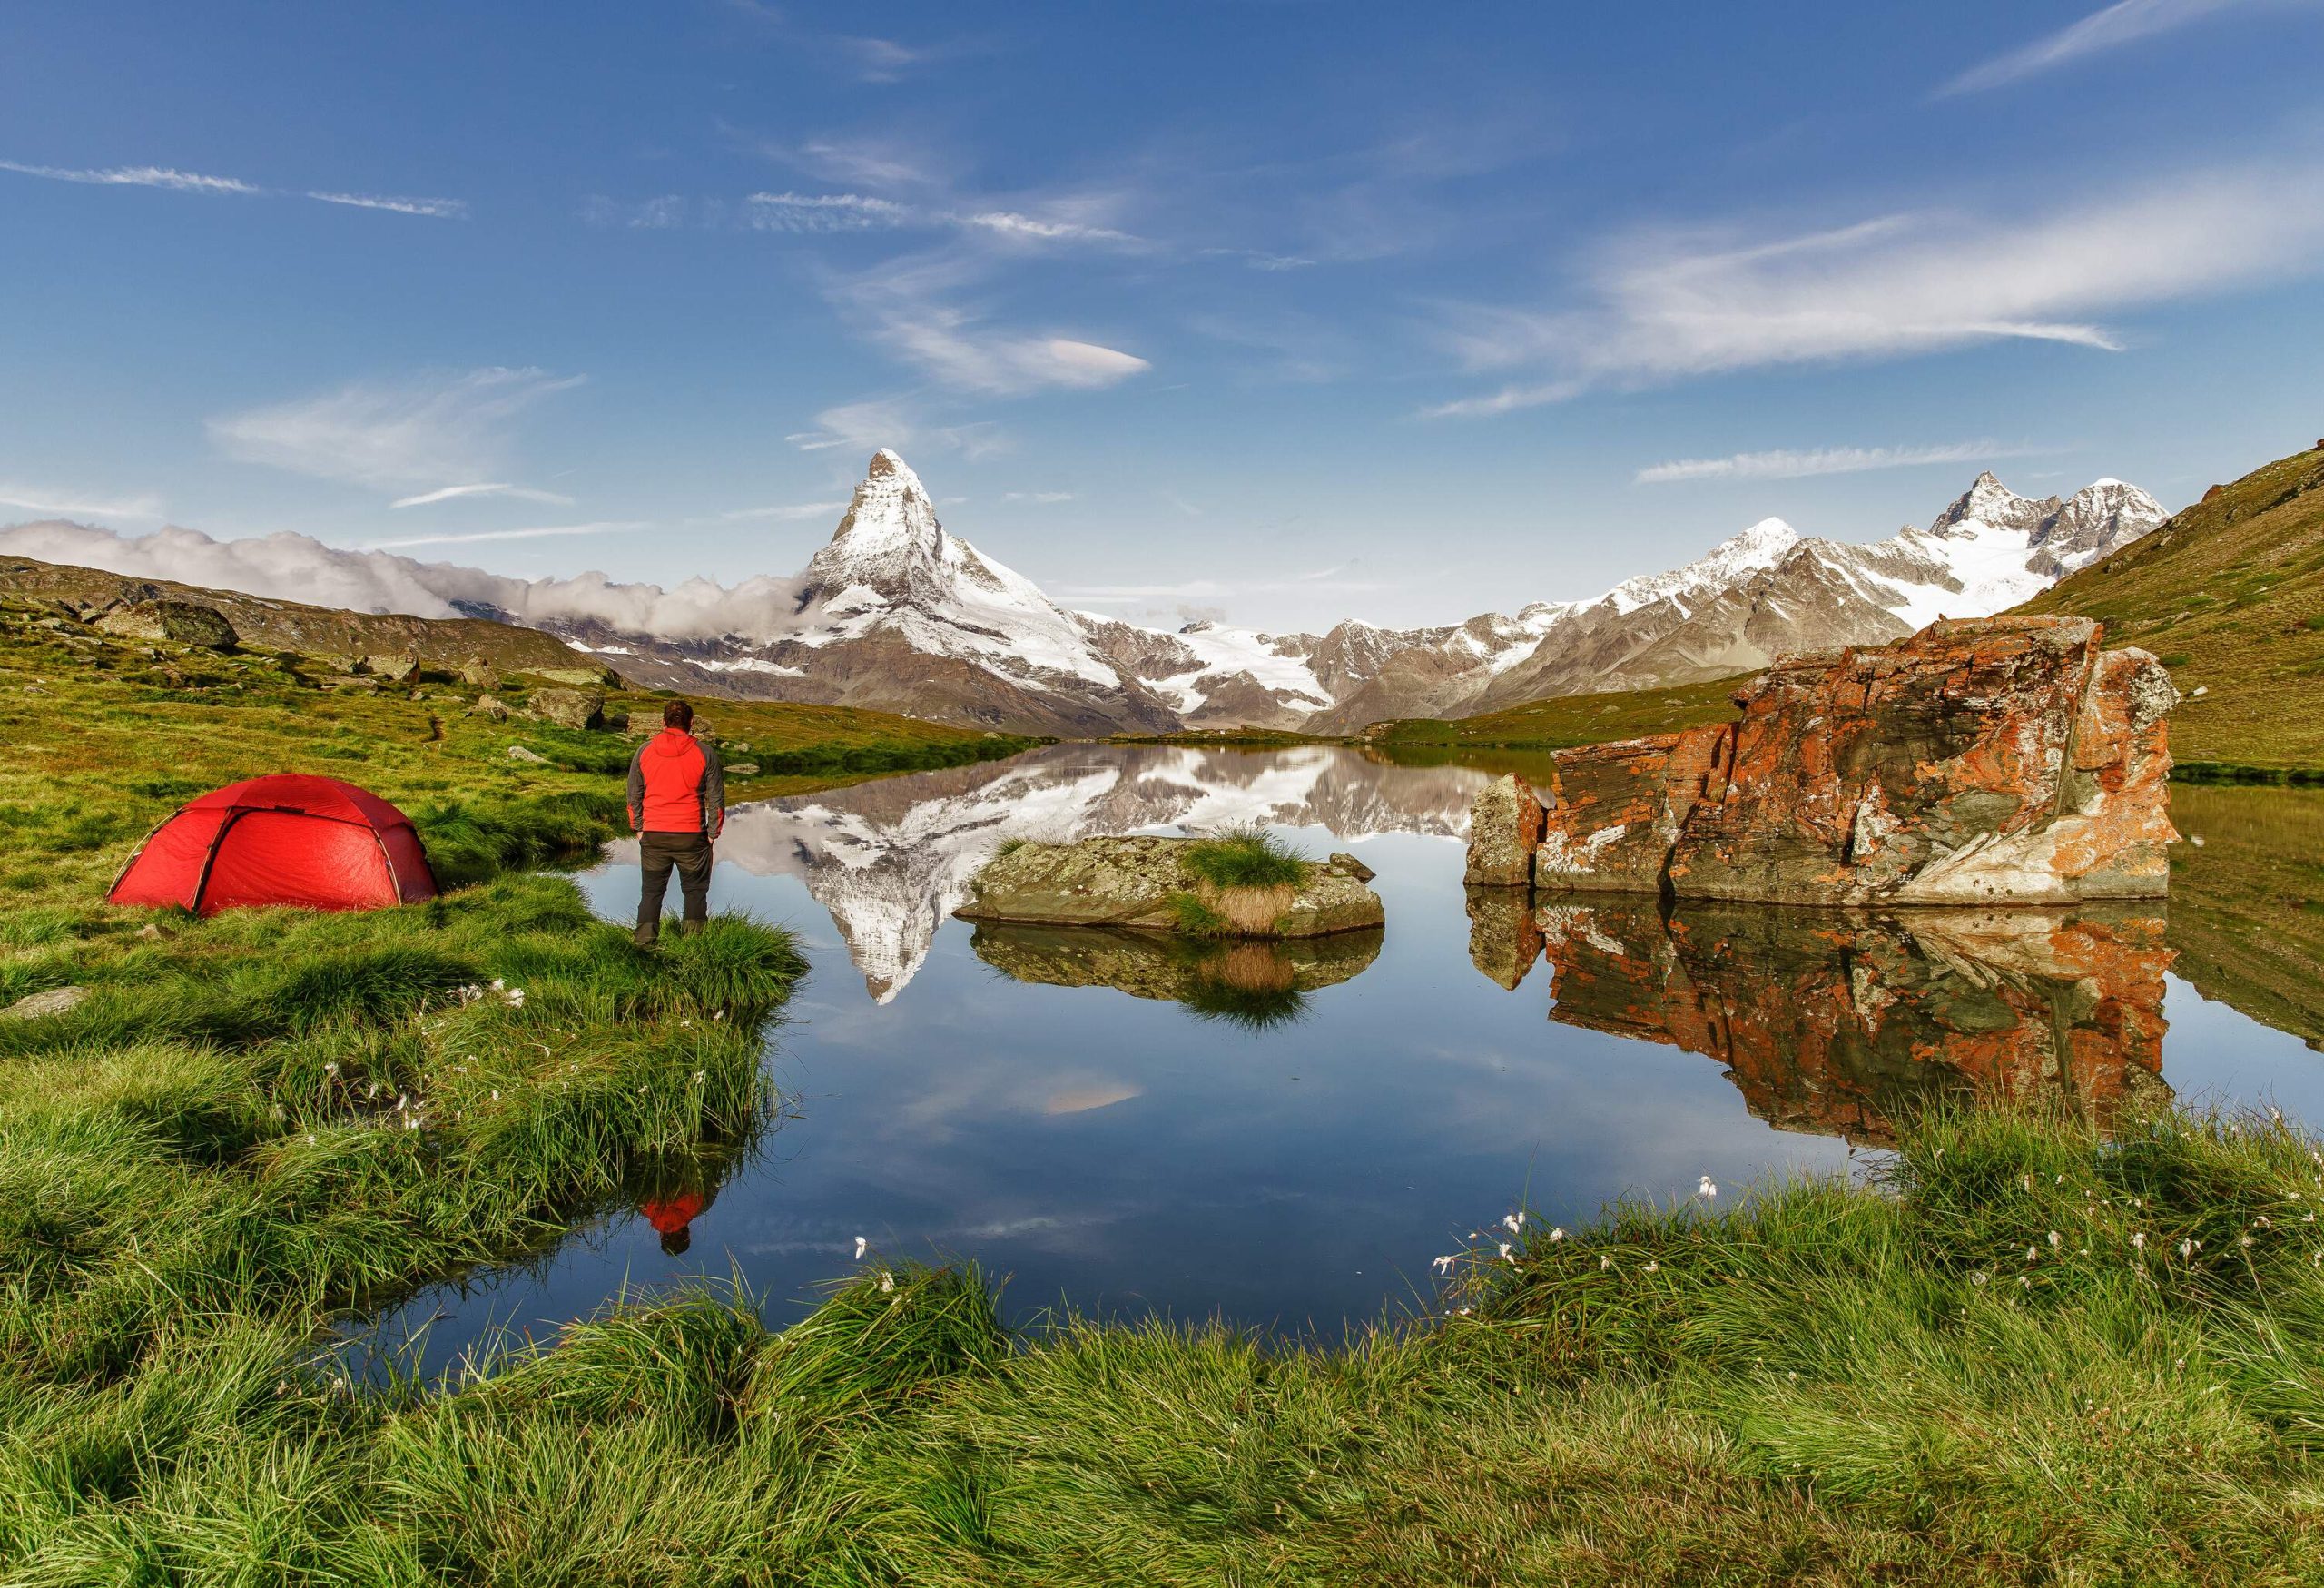 A camper is admiring the stunning view of the Swiss Alps while standing next to a dome tent beside a lake.